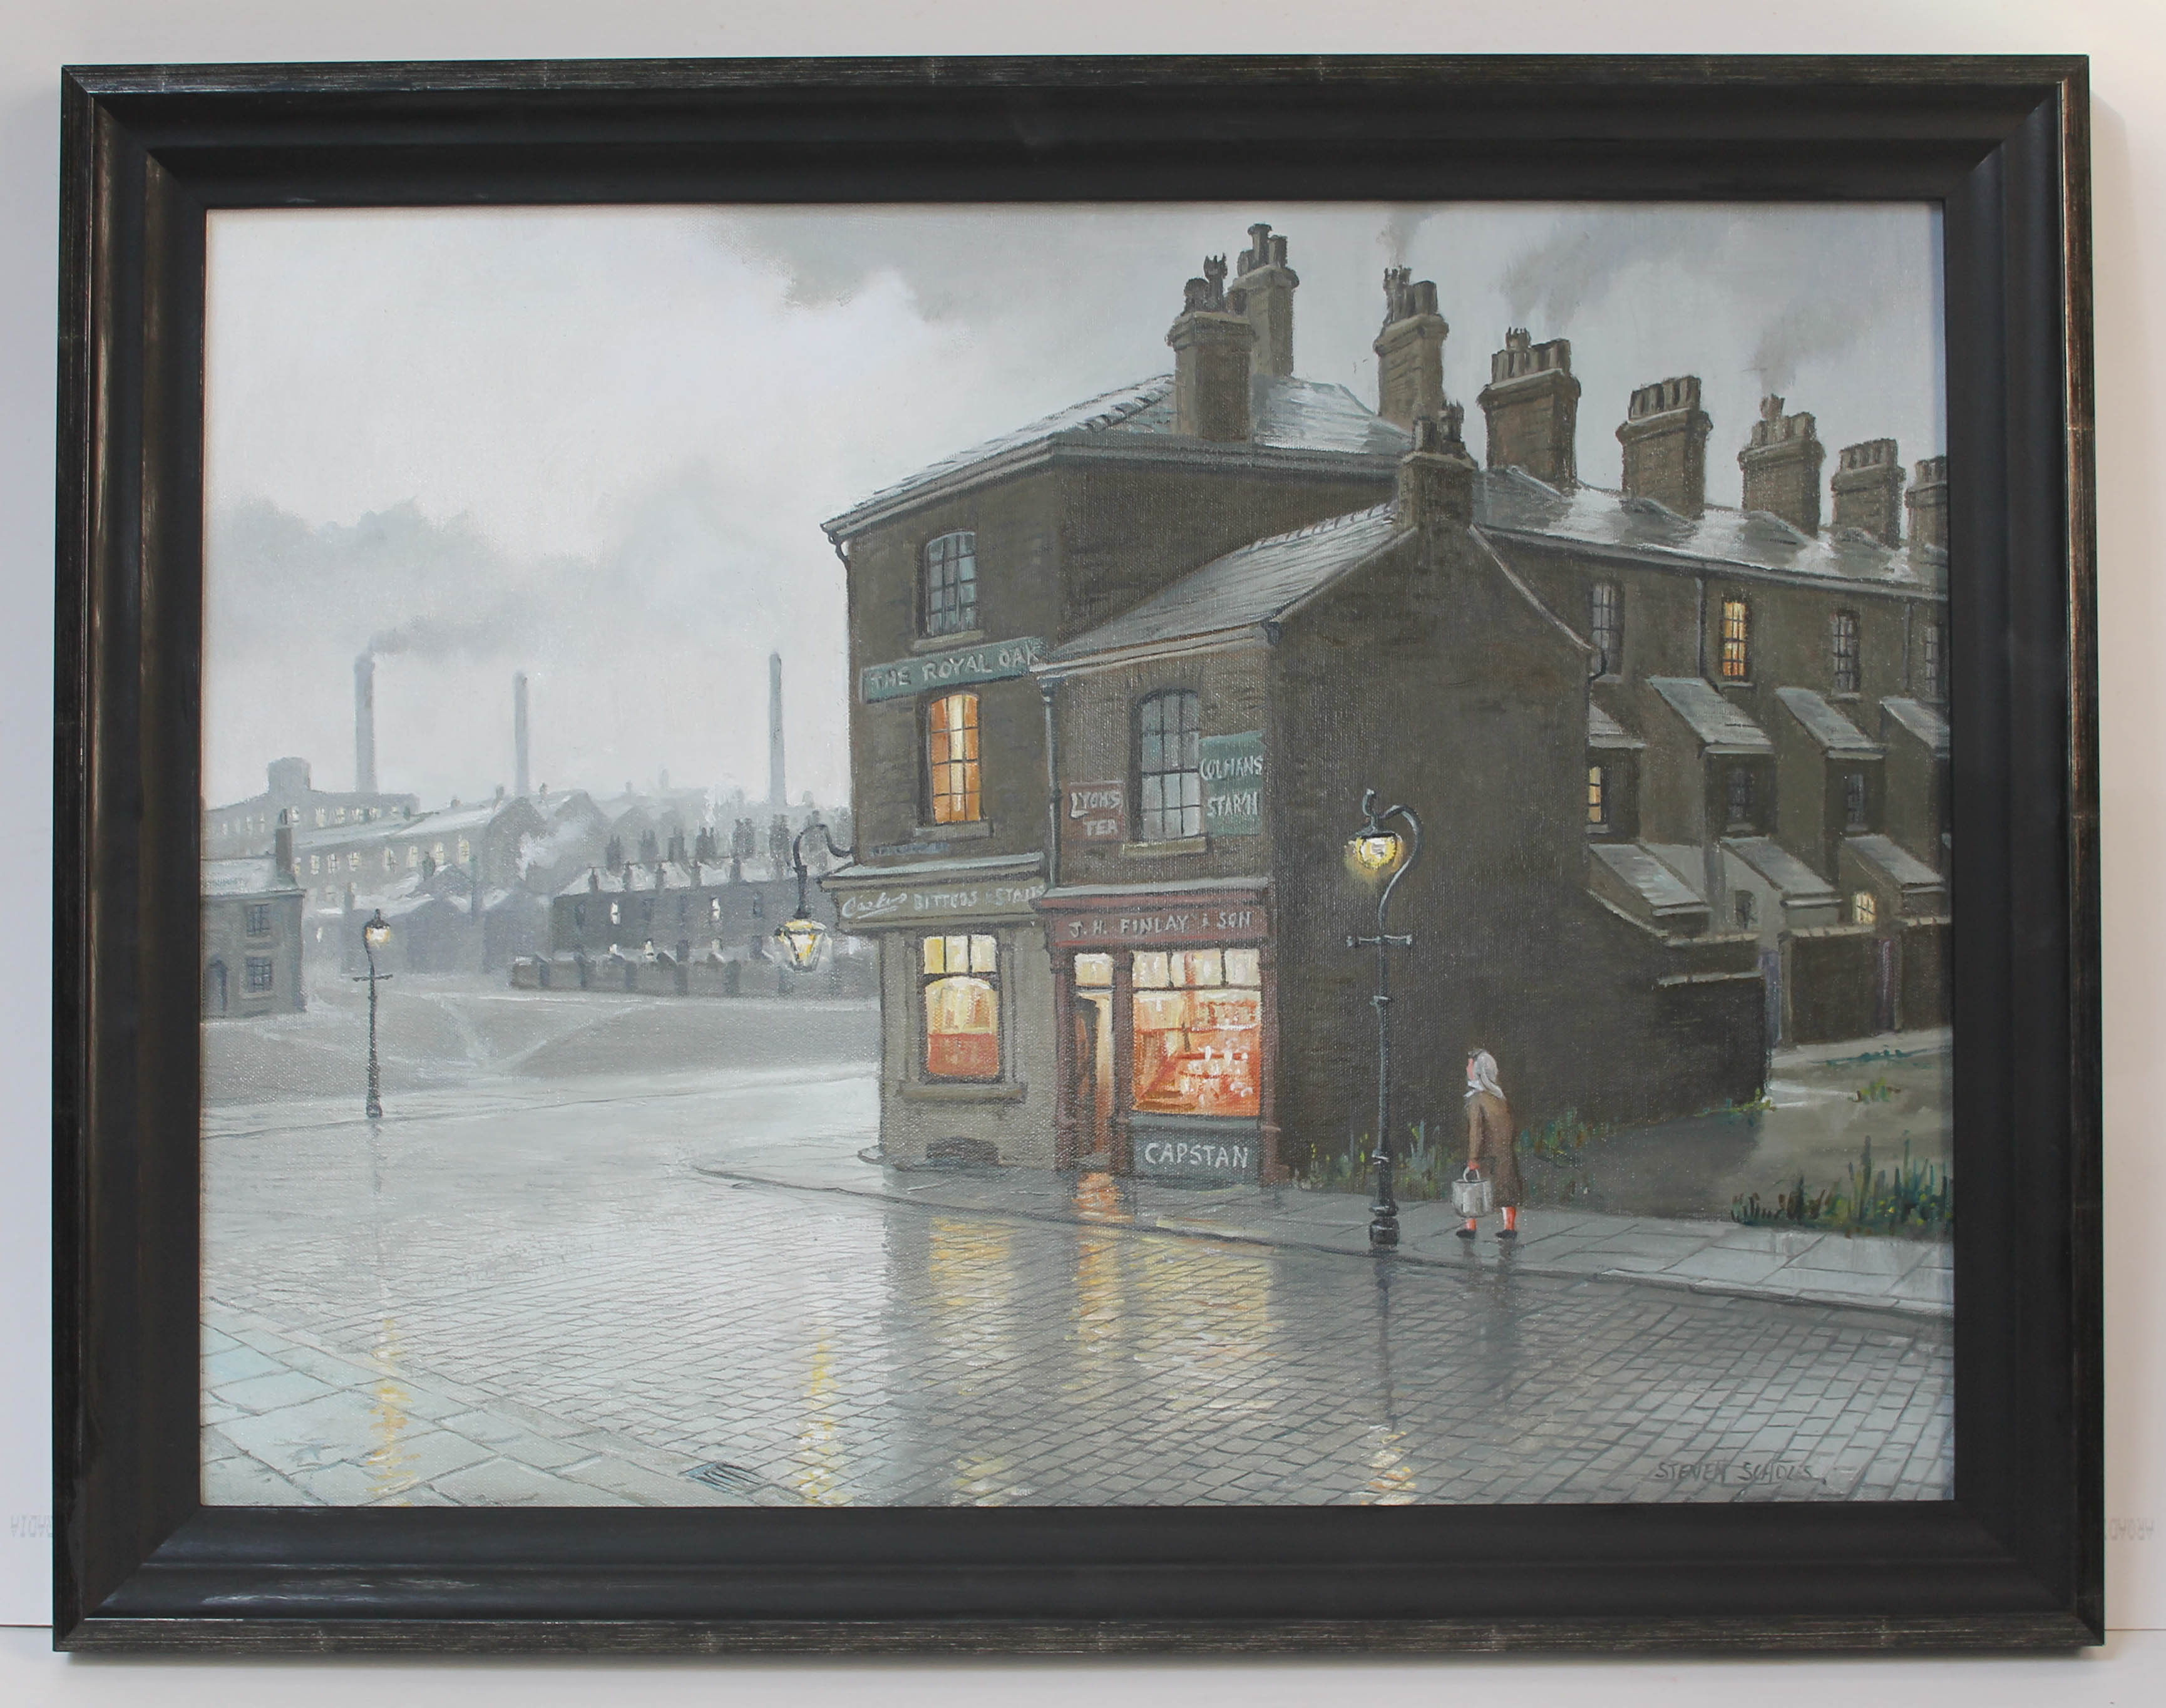 Steven Scholes (b1952), "Midwinter In Salford 1962", Northern Art, oil on canvas, 59cm x 44cm, - Image 3 of 3